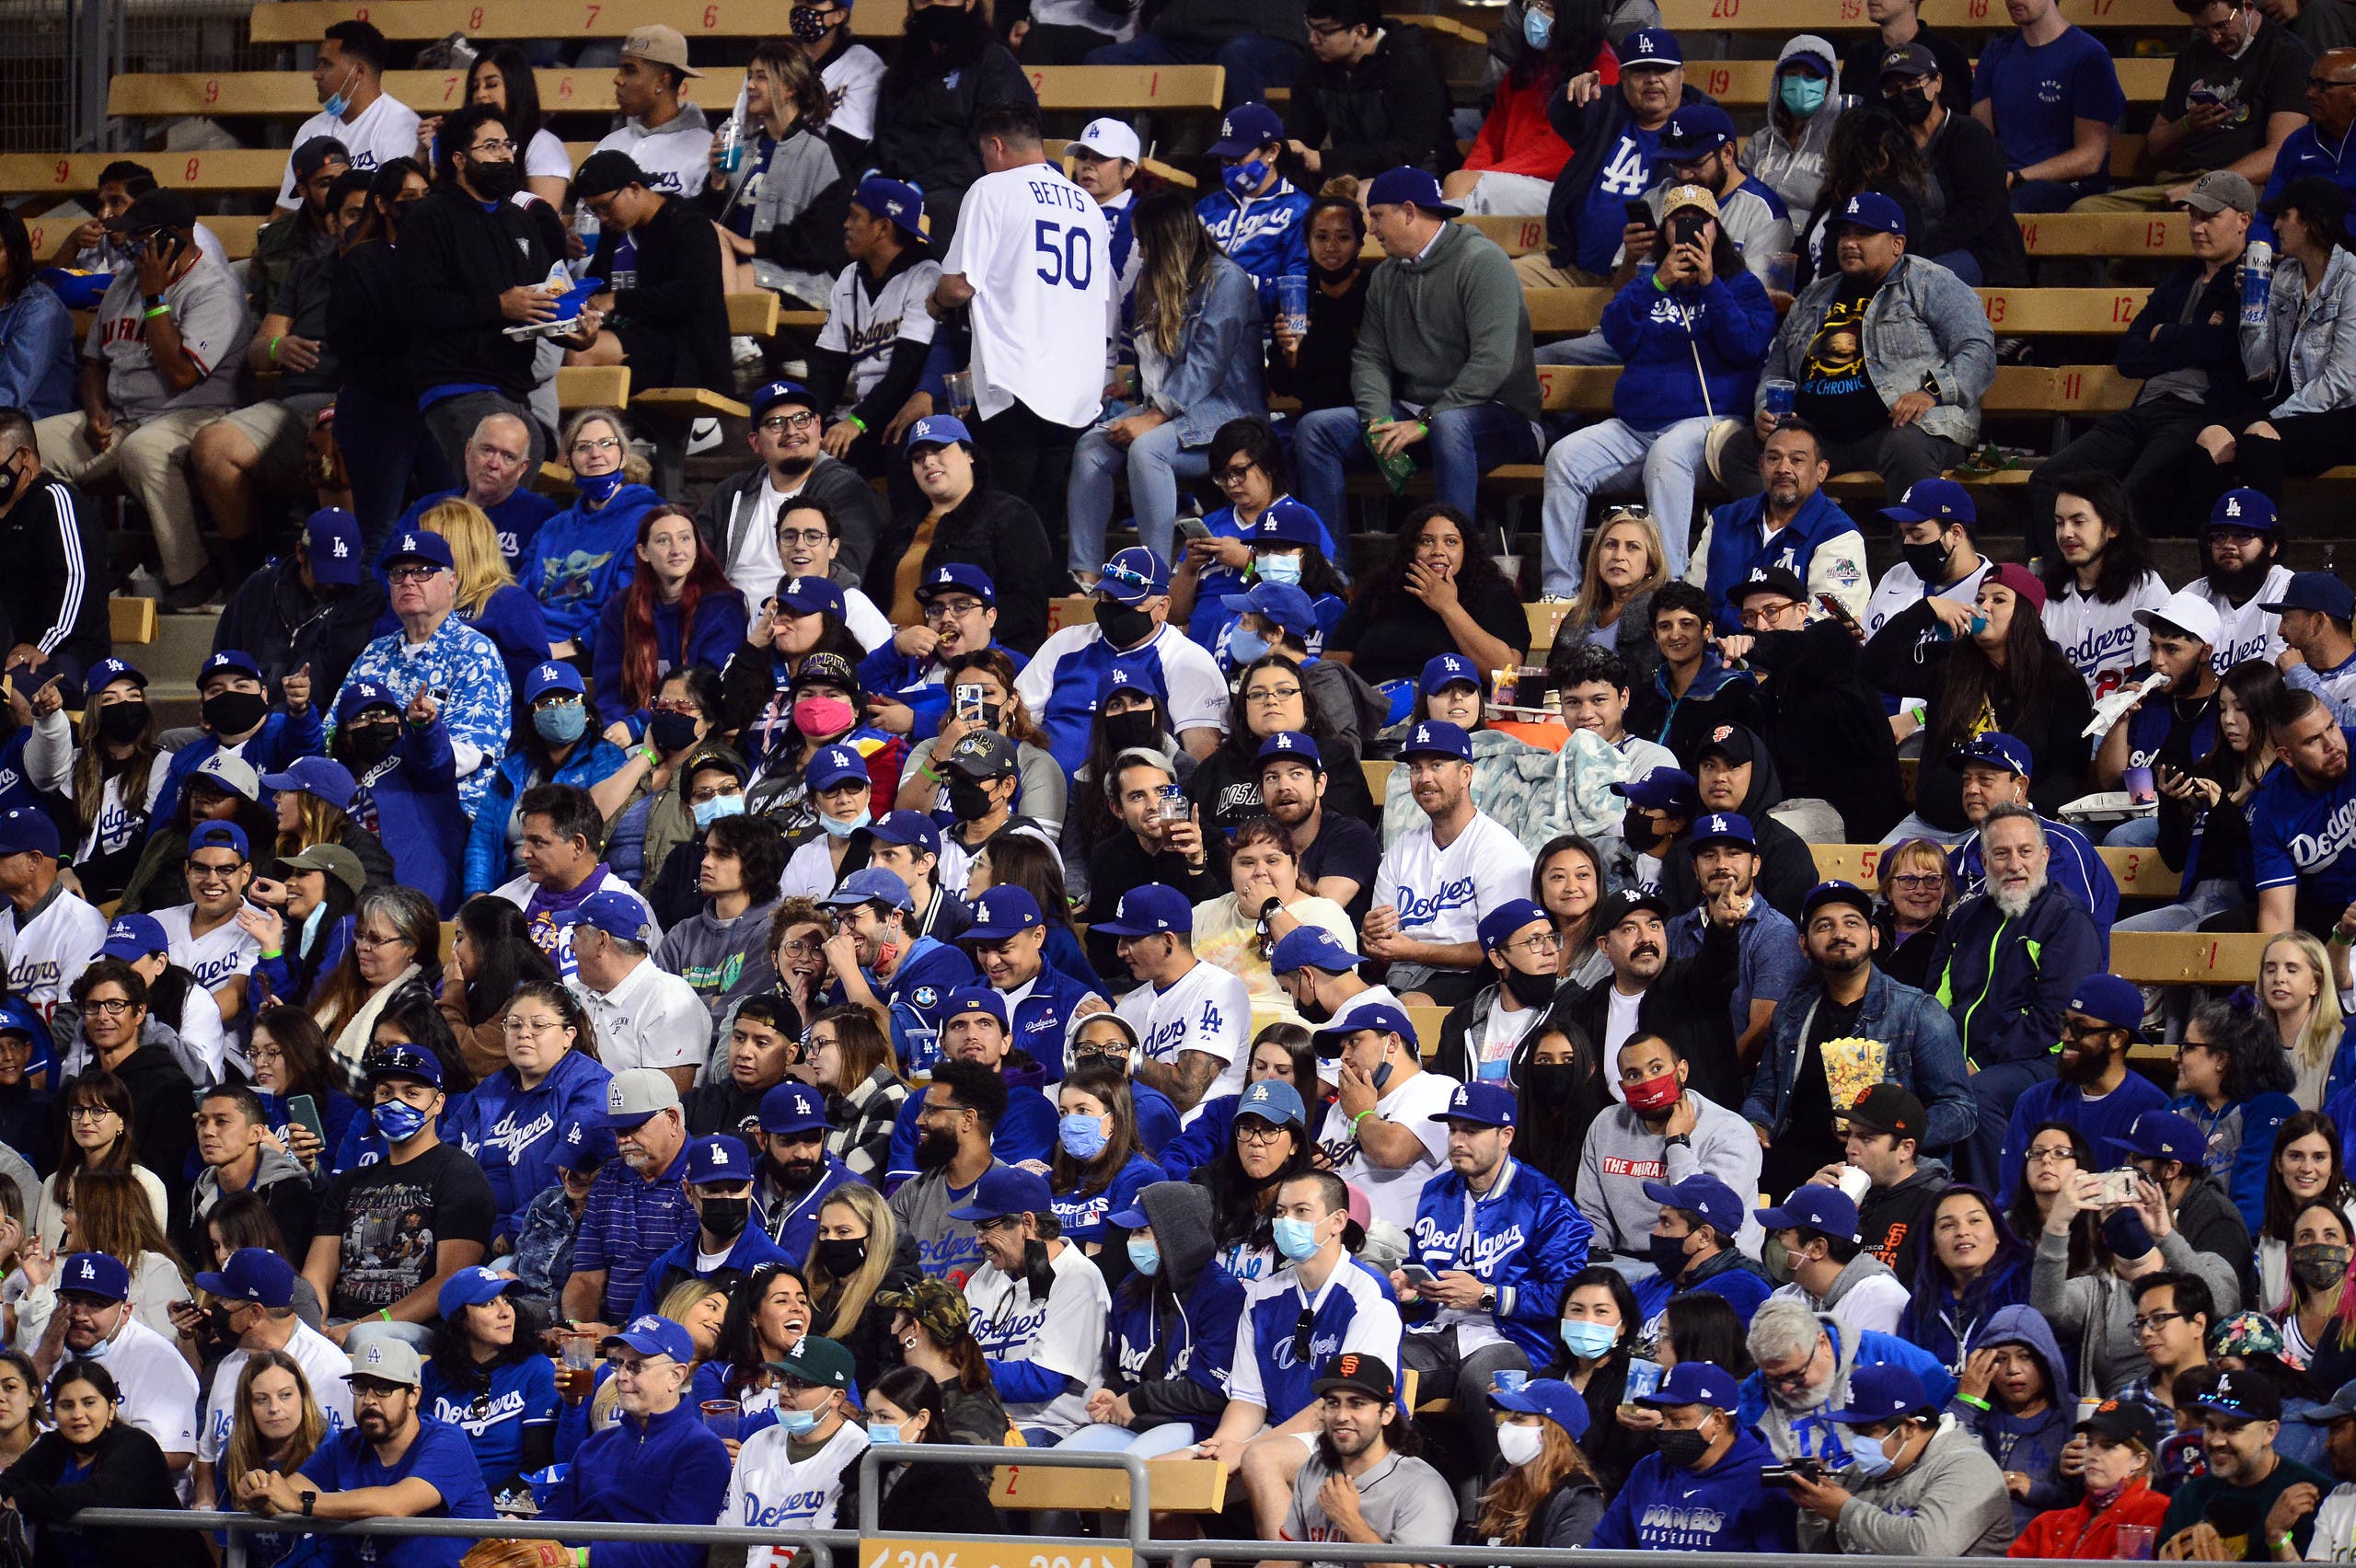 May 27, 2021; Los Angeles, California, USA; General view of seating for COVID-19 vaccinated spectators at Dodger Stadium. (Reuters/USA Today Sports)